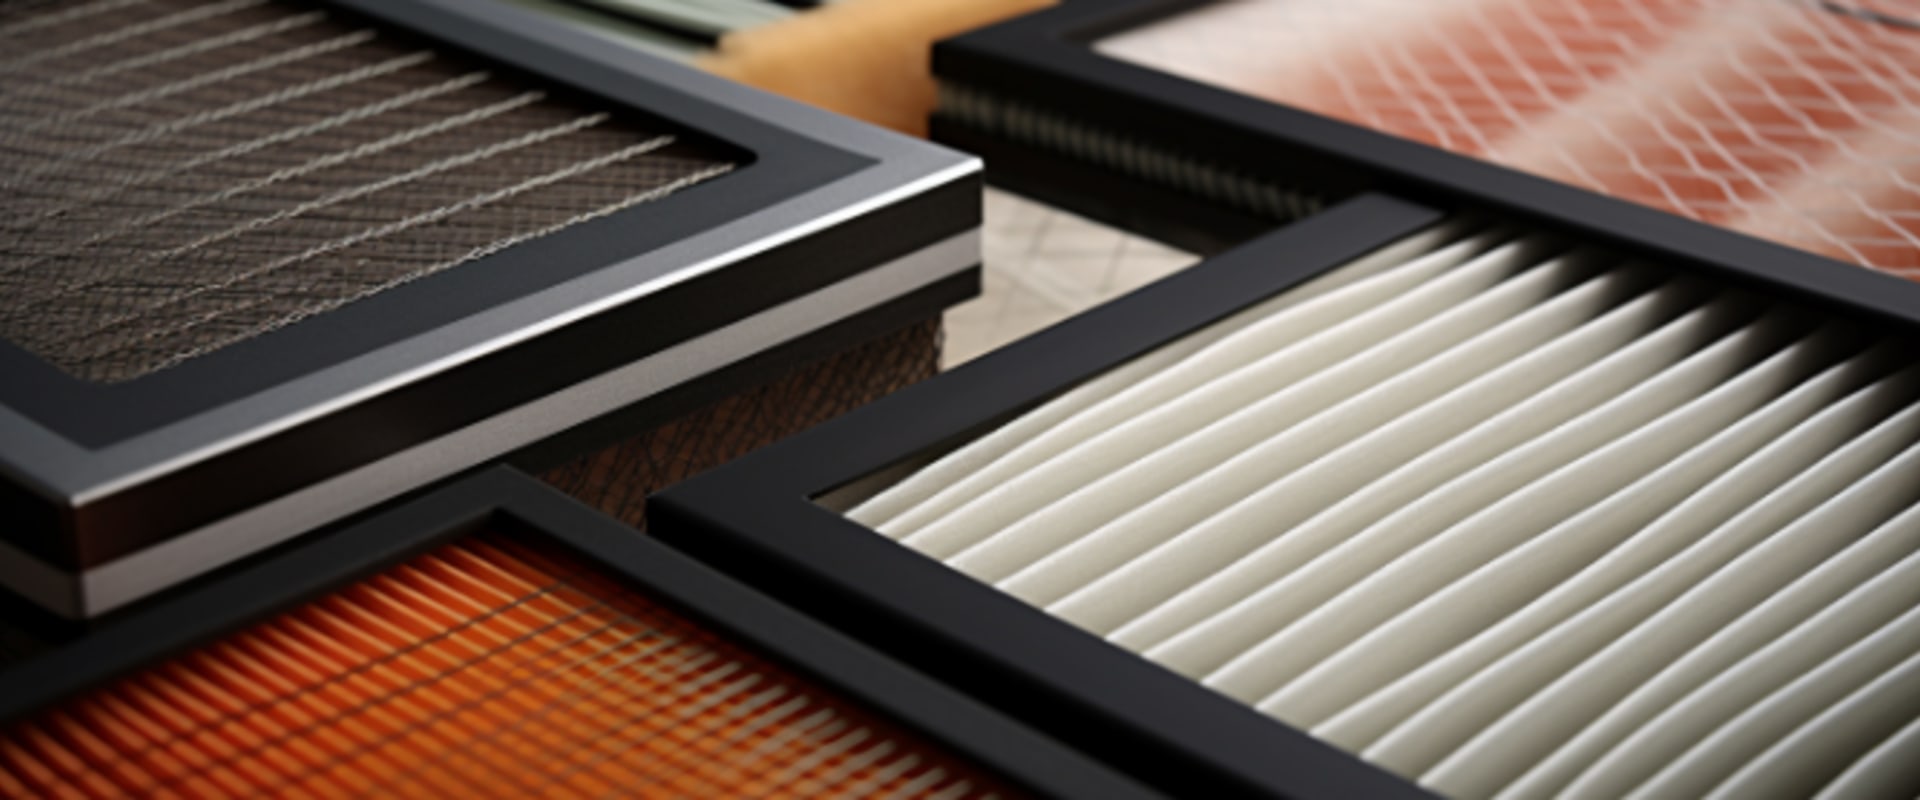 Guidance on How Often Should You Change Your Furnace Filter